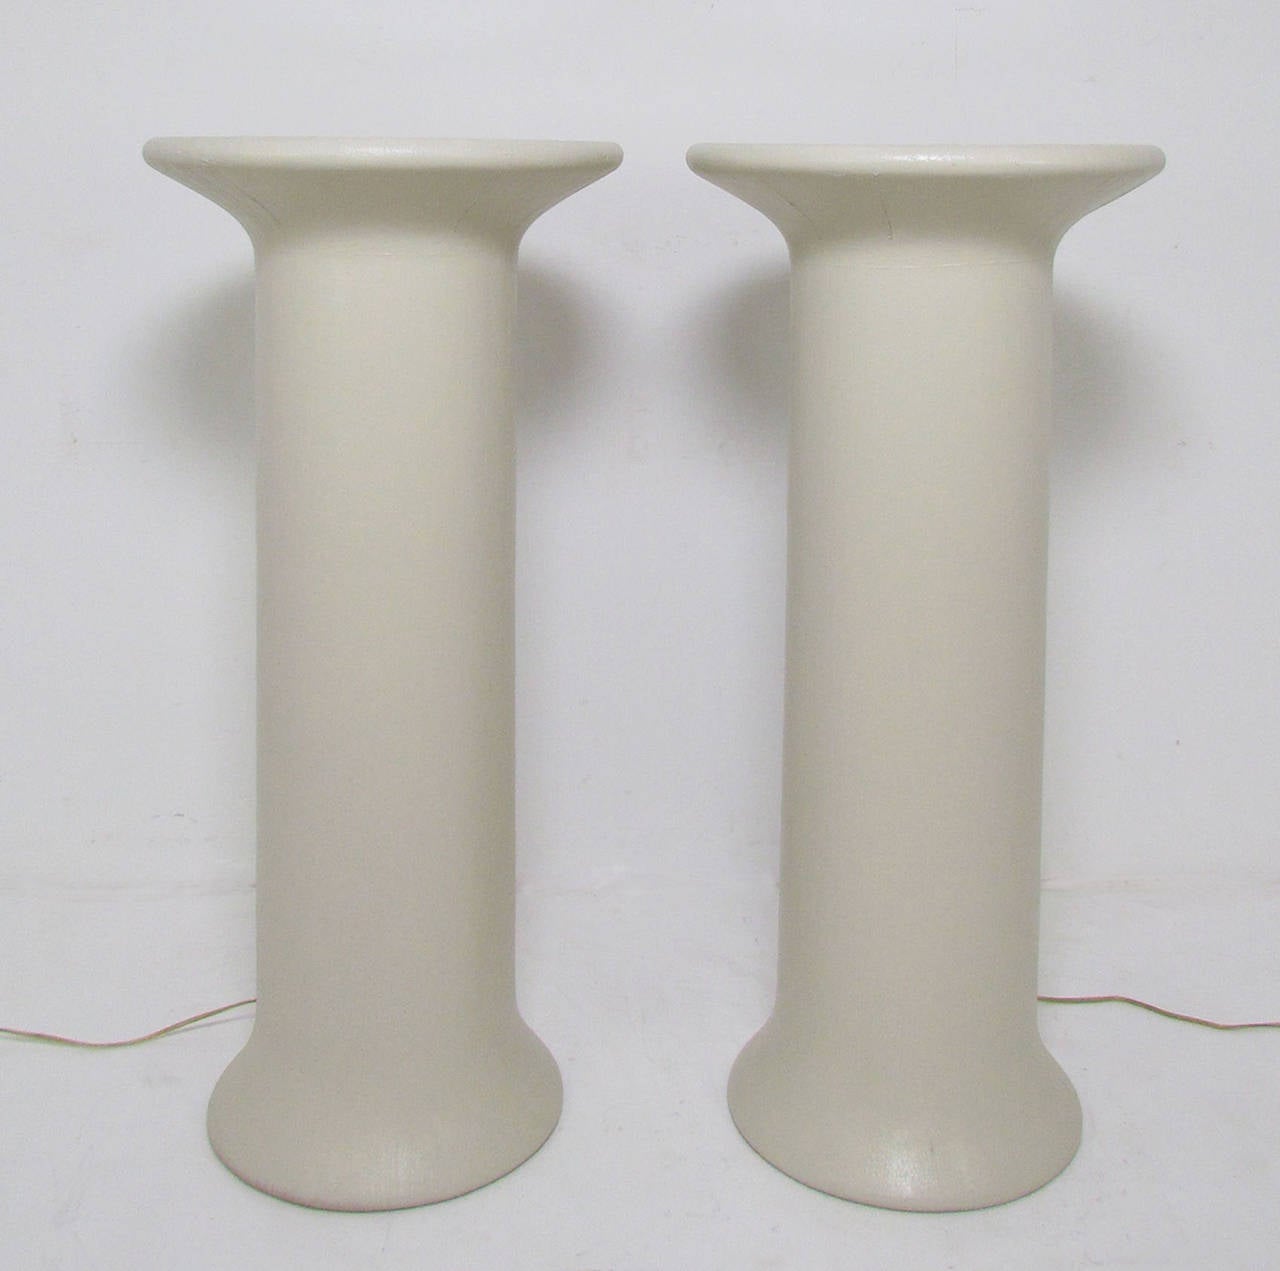 Pair of columnar lighted display pedestals in lacquered linen with frosted glass tops, circa 1970s.